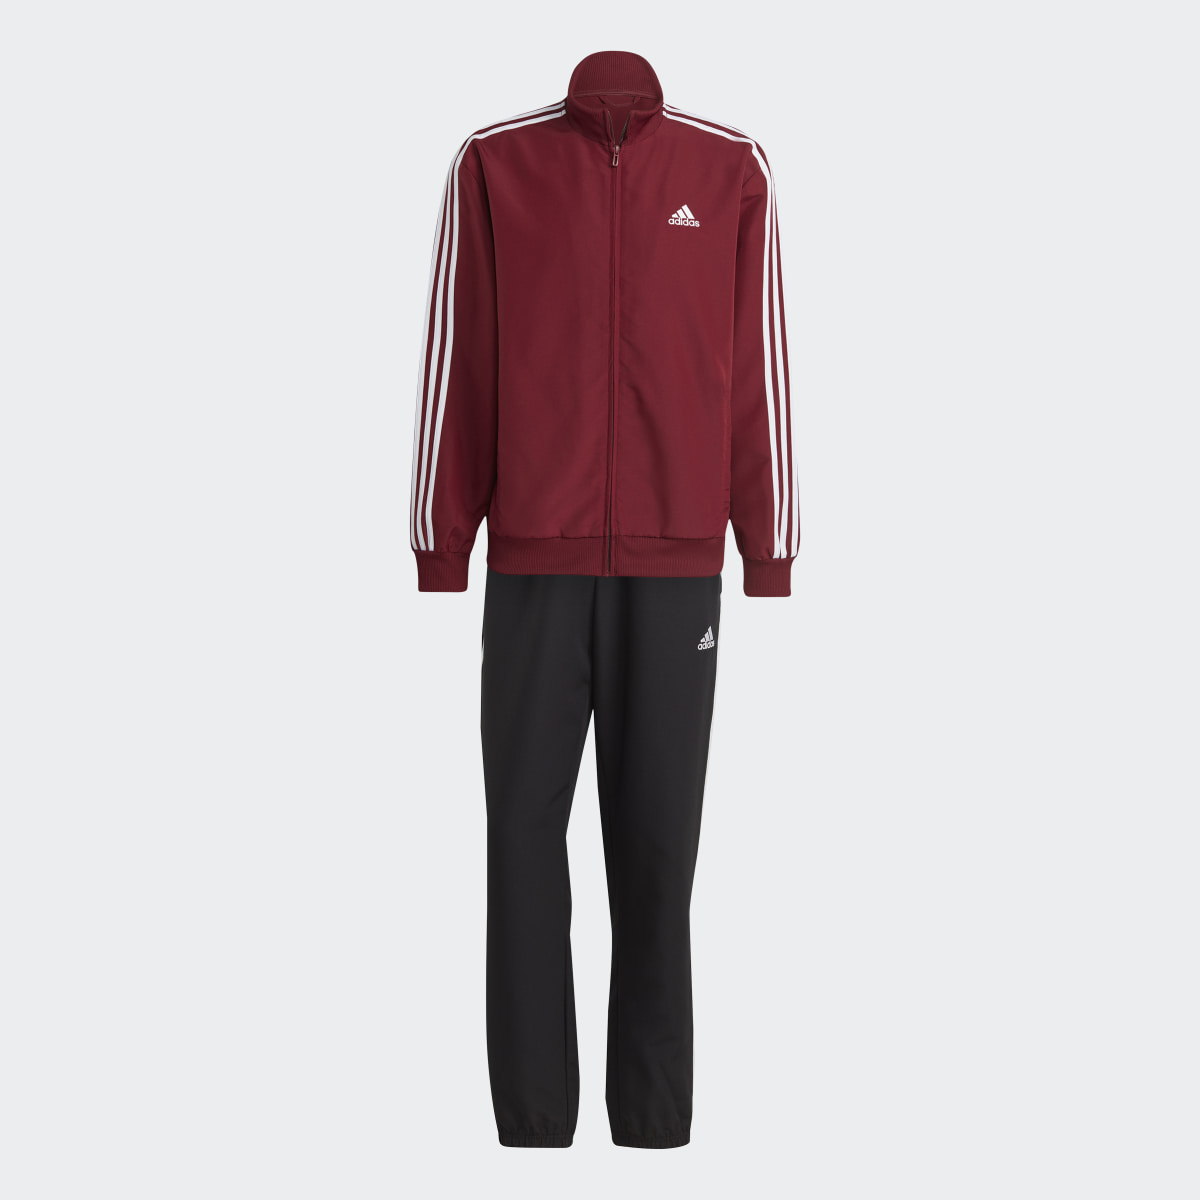 Adidas 3-Stripes Woven Tracksuit. 5